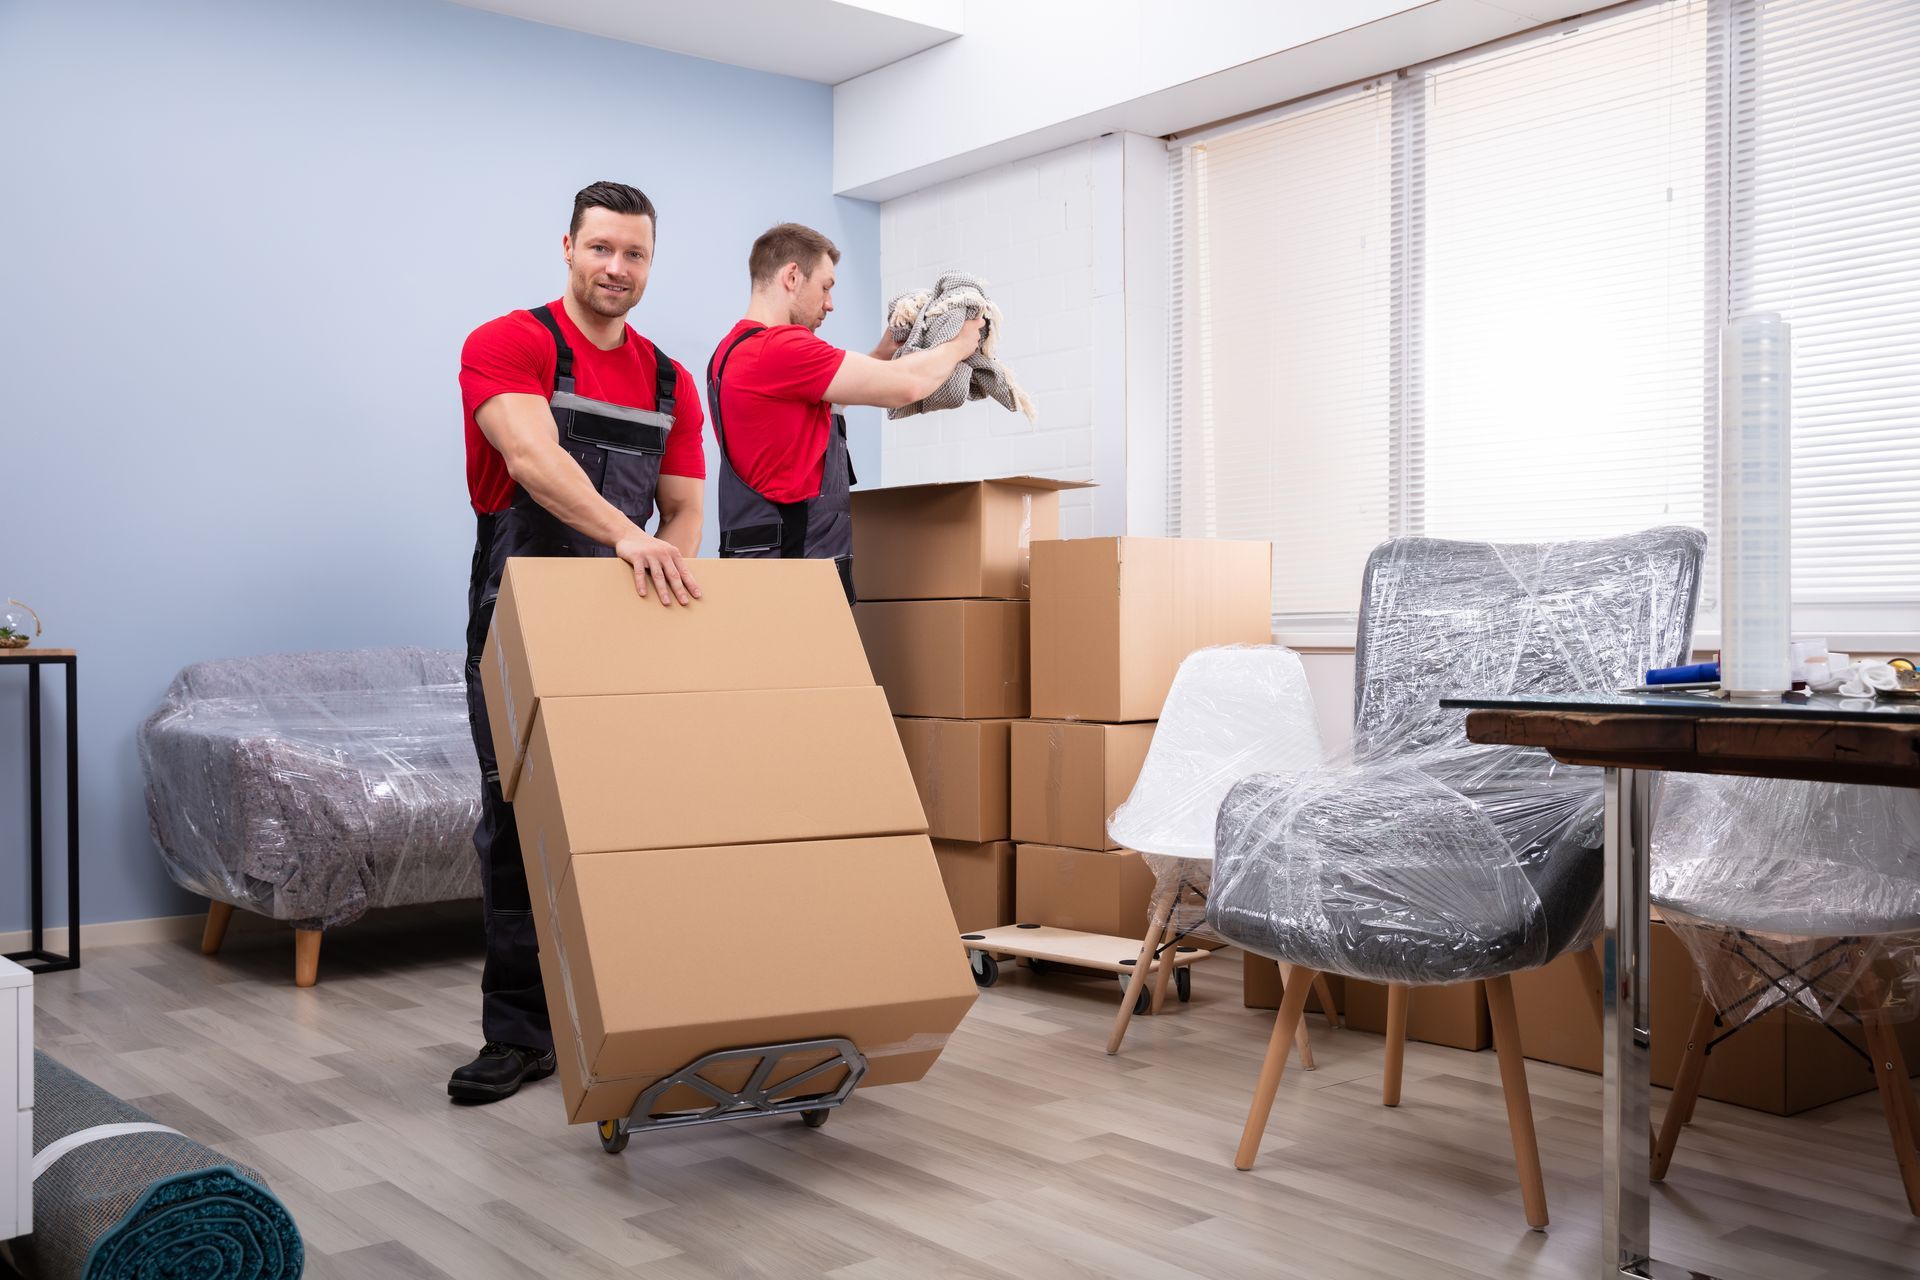 Two men are moving boxes in a living room.